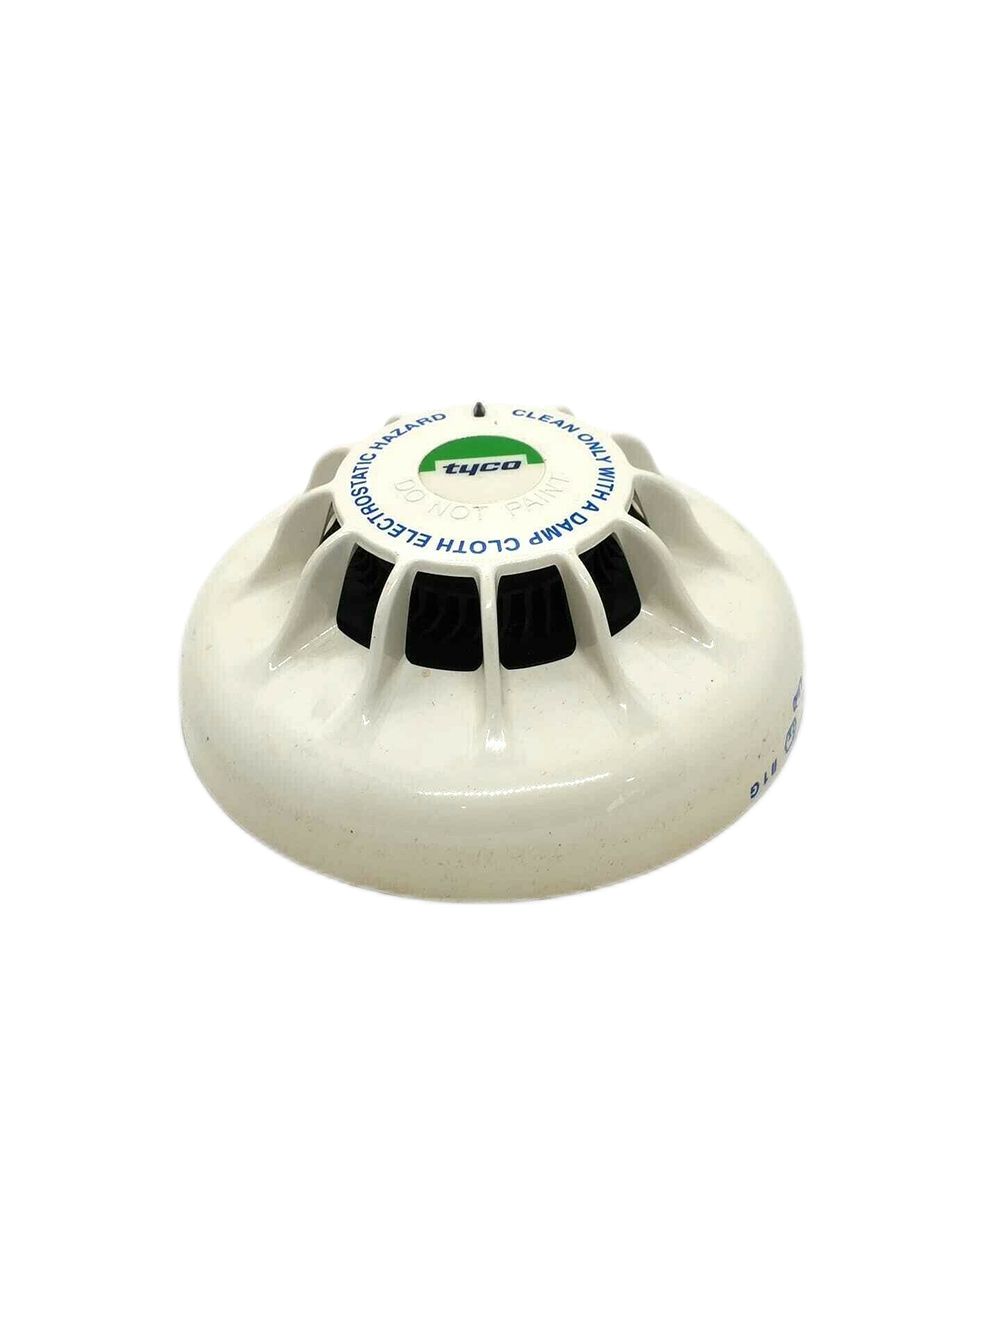 New In stock for sale, Tyco Flame Detector MR601TEX